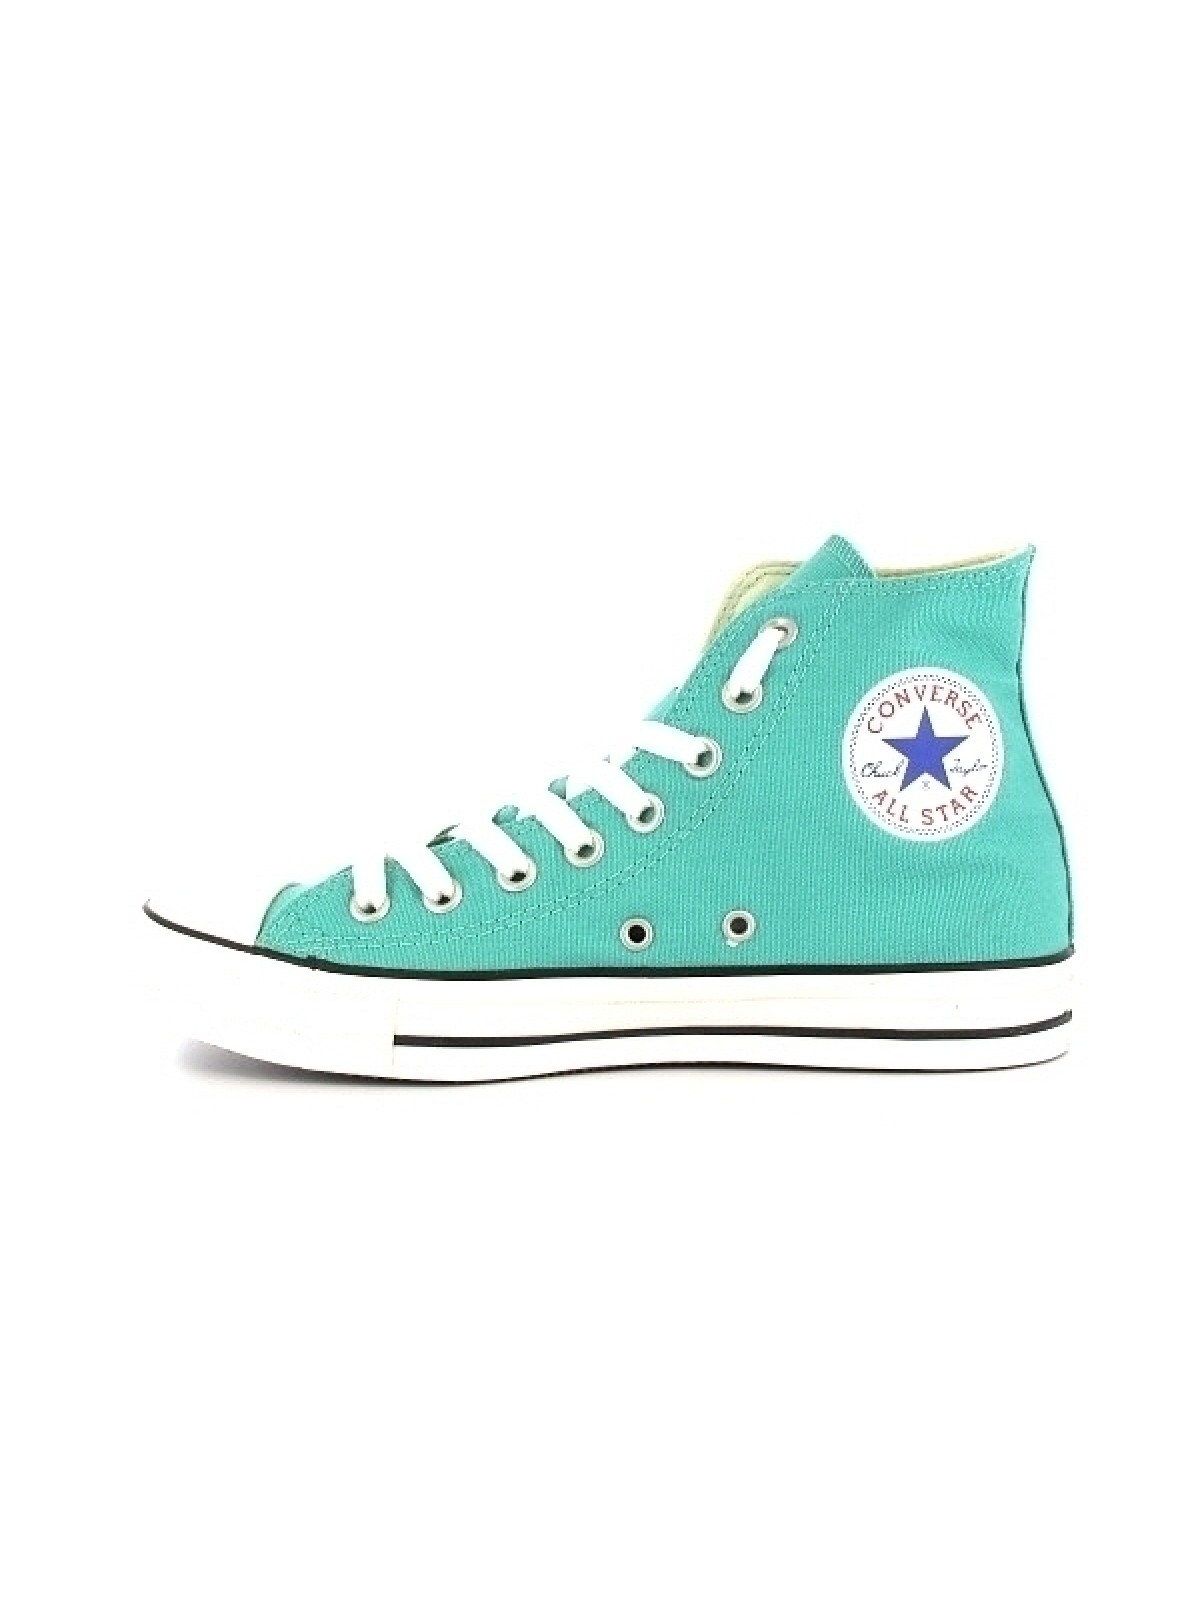 converse chuck taylor all star turquoise